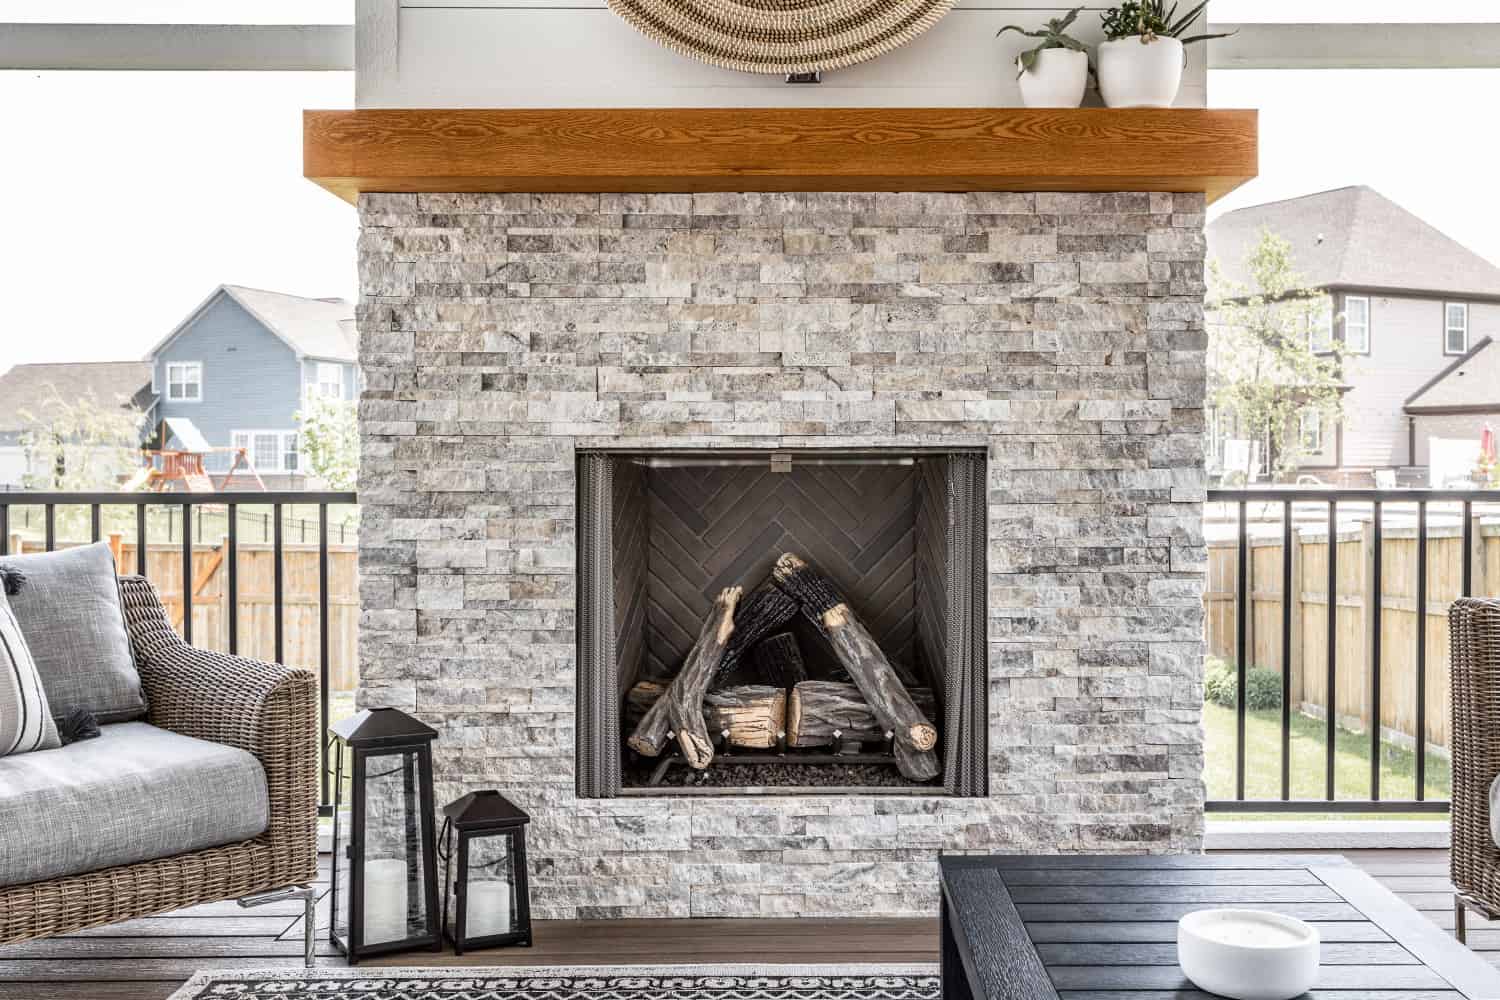 Nicholas Design Build | A remodeled patio with a fireplace and wicker furniture.